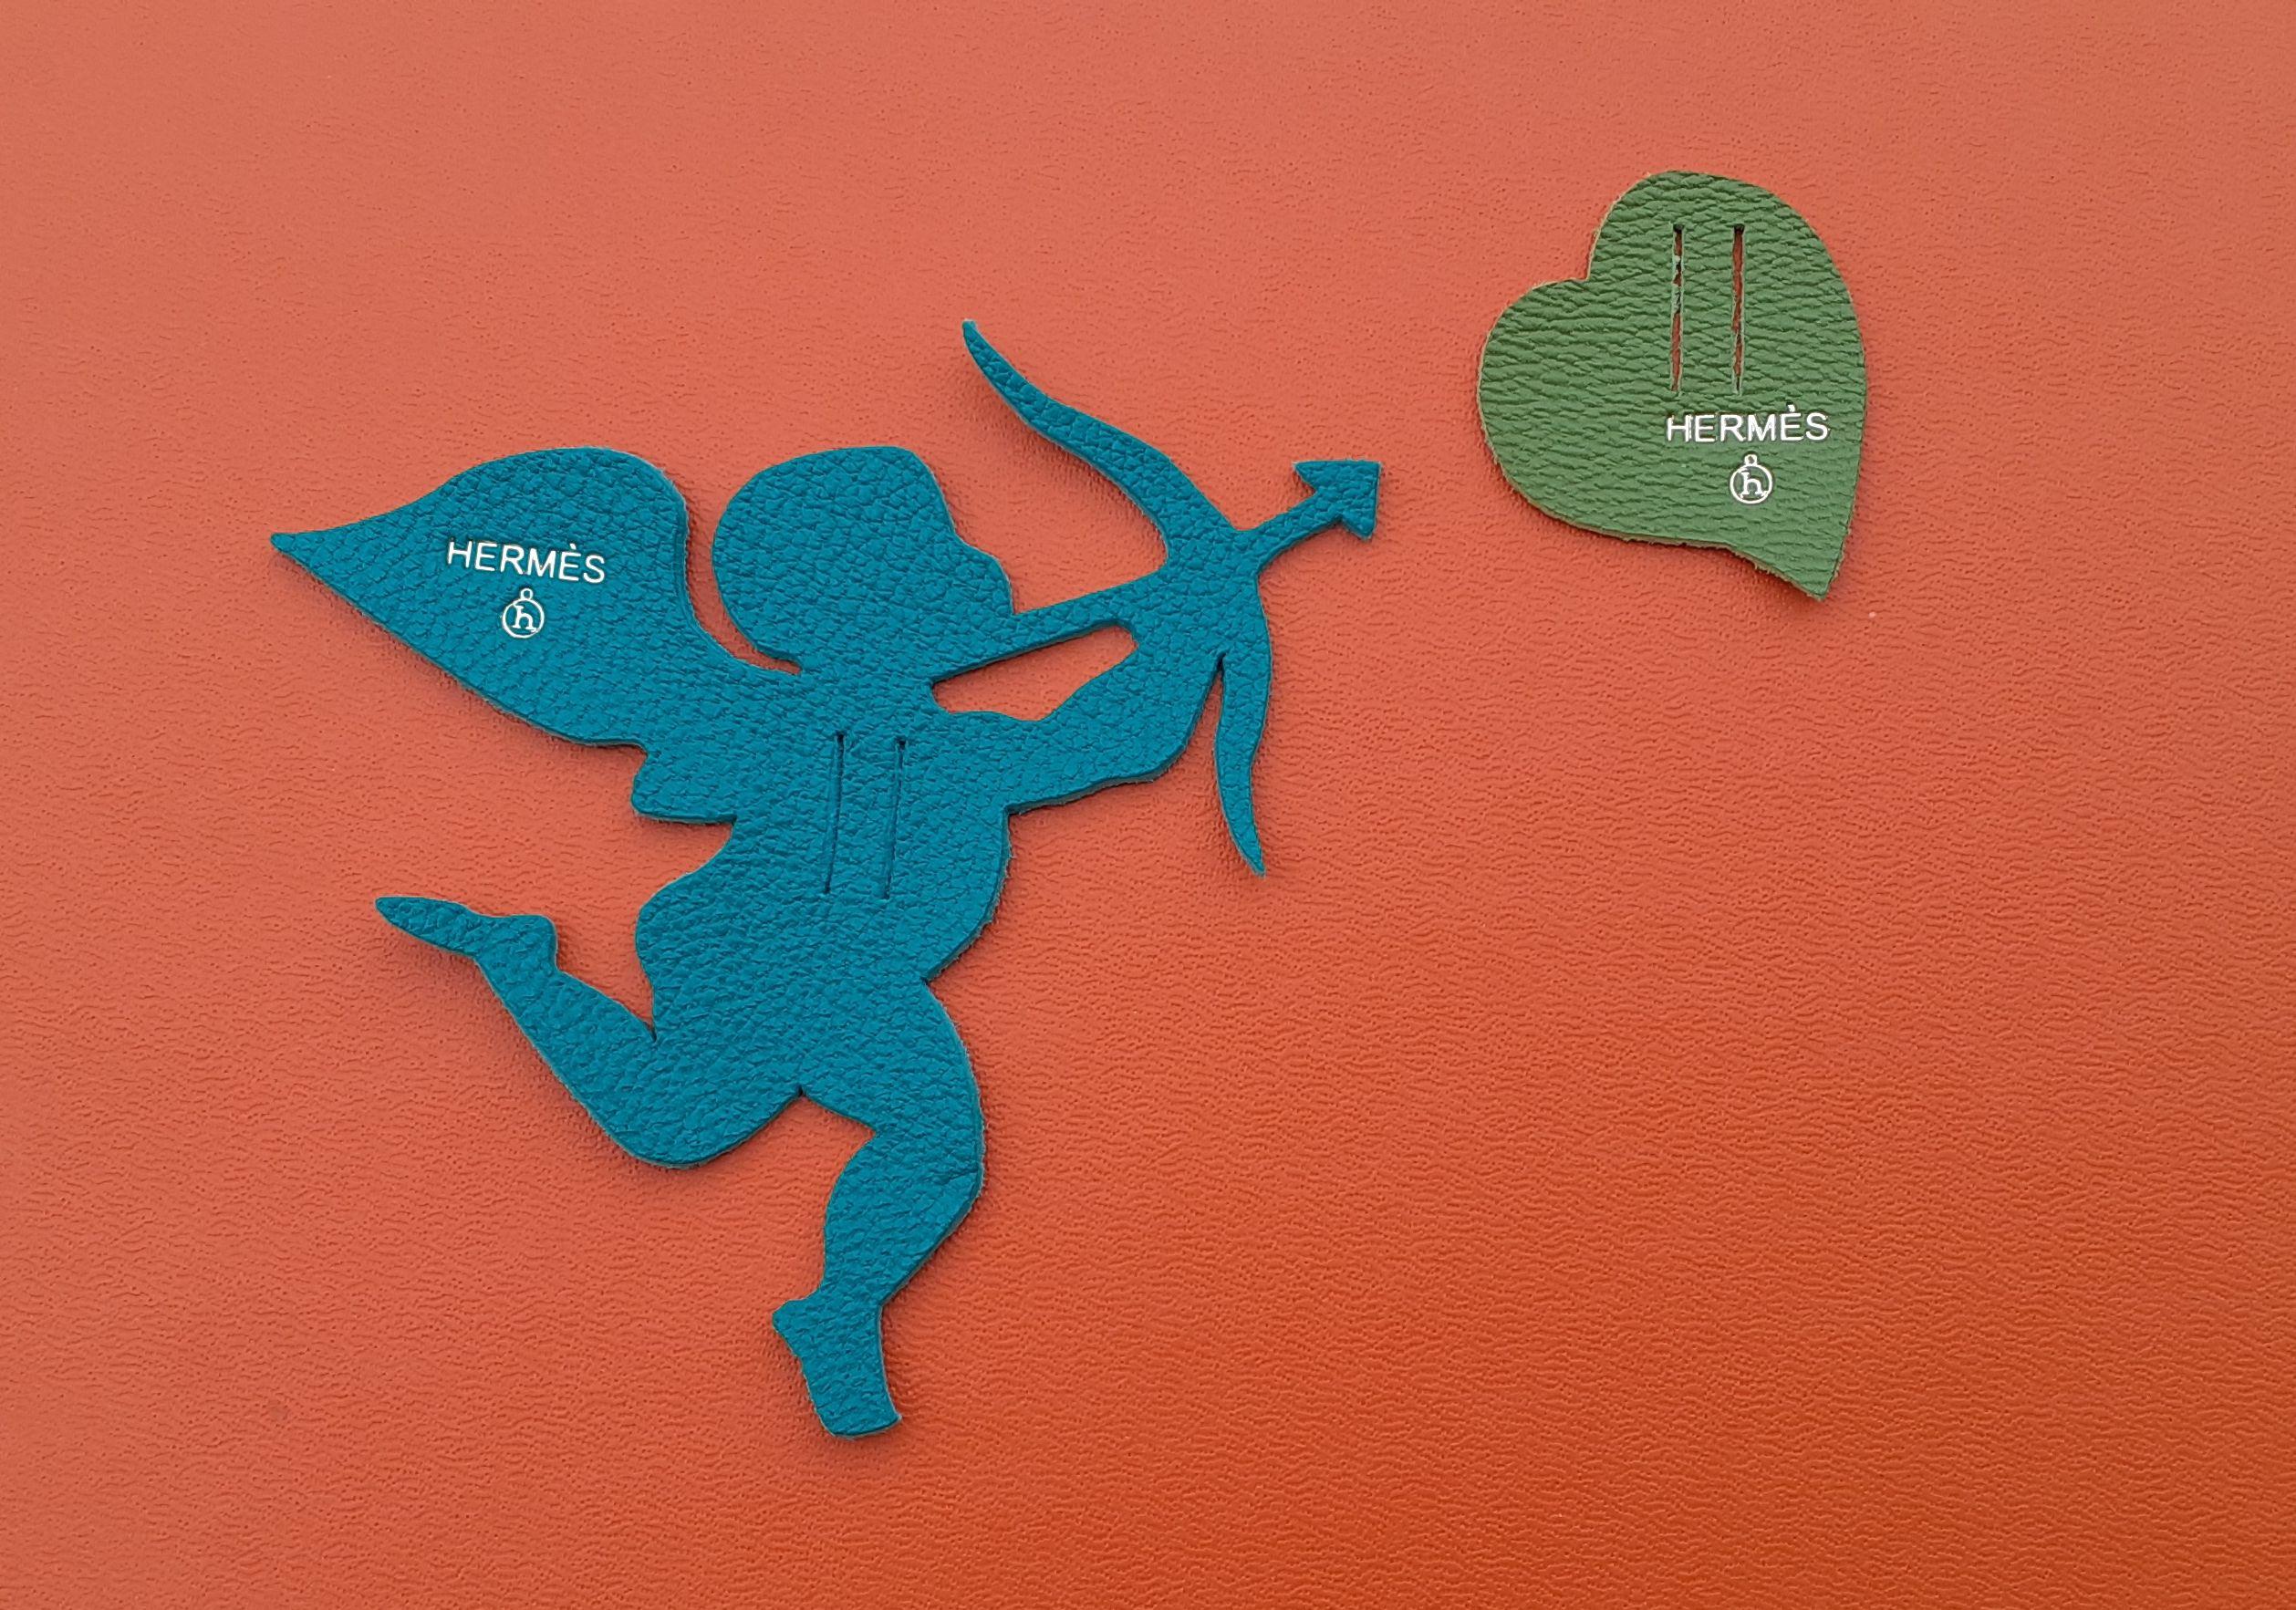 Please note: Cupid may appear blue. It is in fact lawn green

Shapes: Cupid and Heart

From the Petit h collection

Made of leather

Colorway: lawn green / anise green

These charms adorned the packaging of a small h item, so it has only one